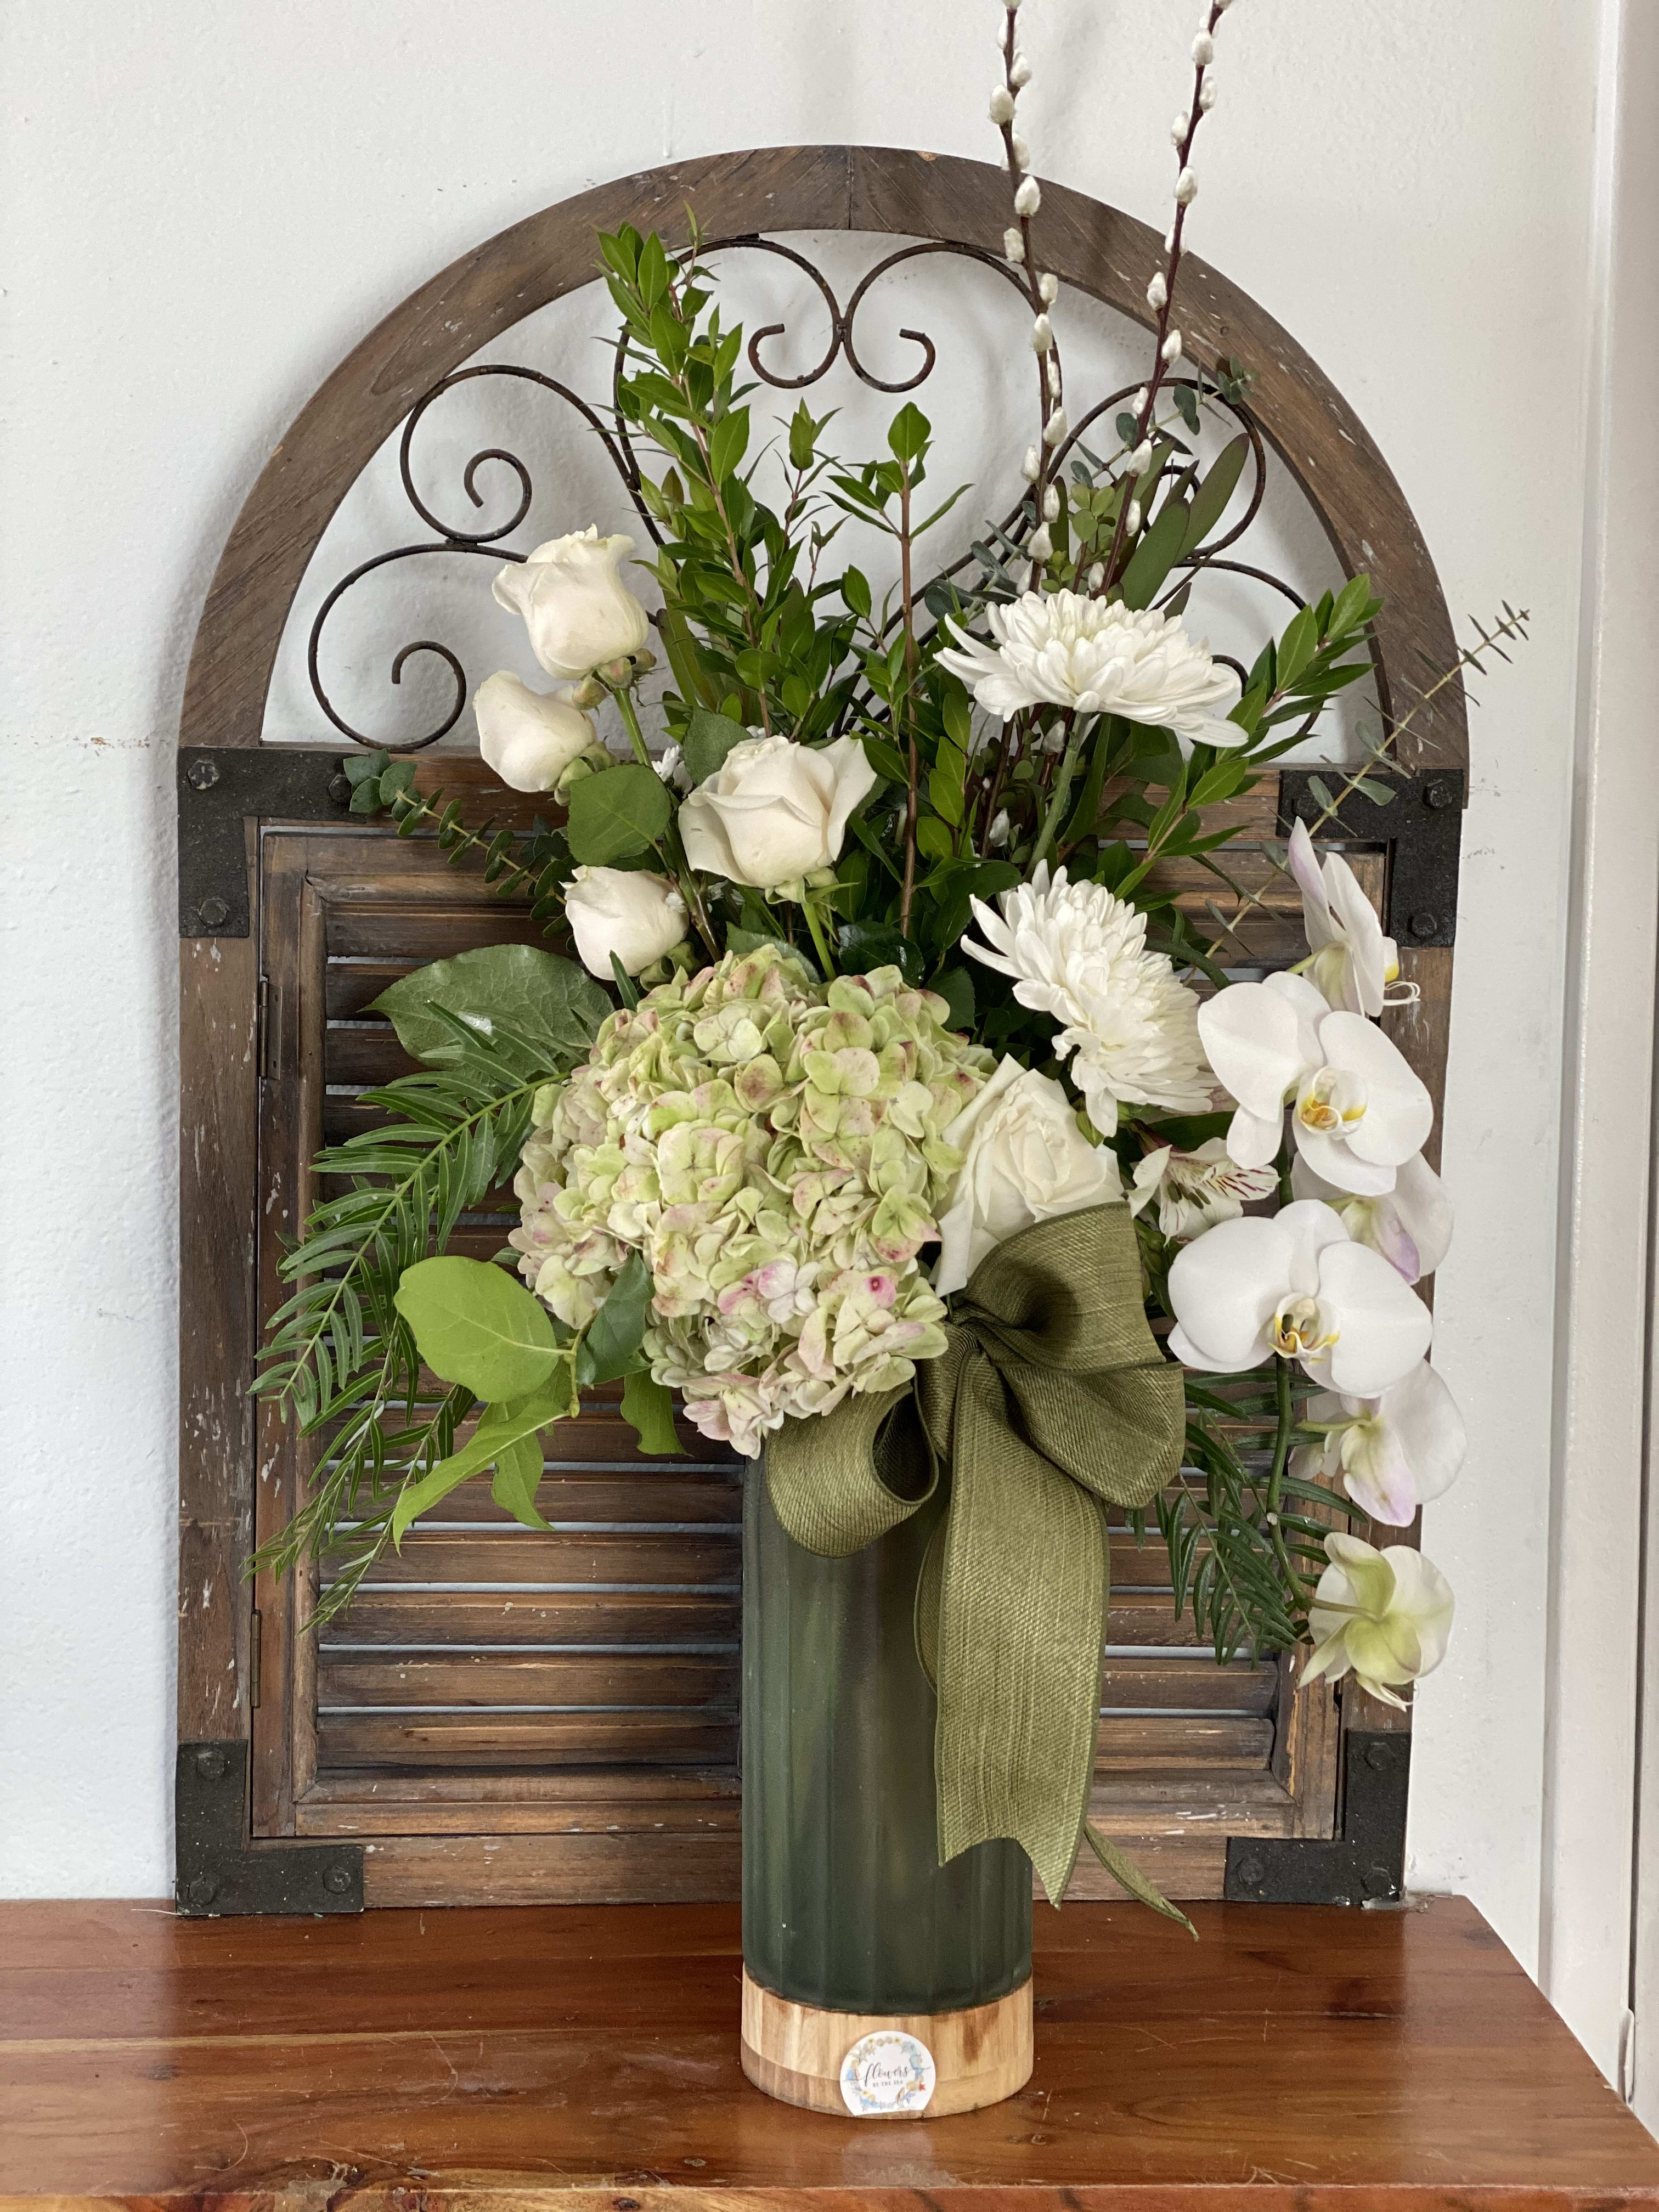 Vintage love - Tall and nice green Vase with Wood support, and tall white flowers and vintage hydrangea, simple but elegant.